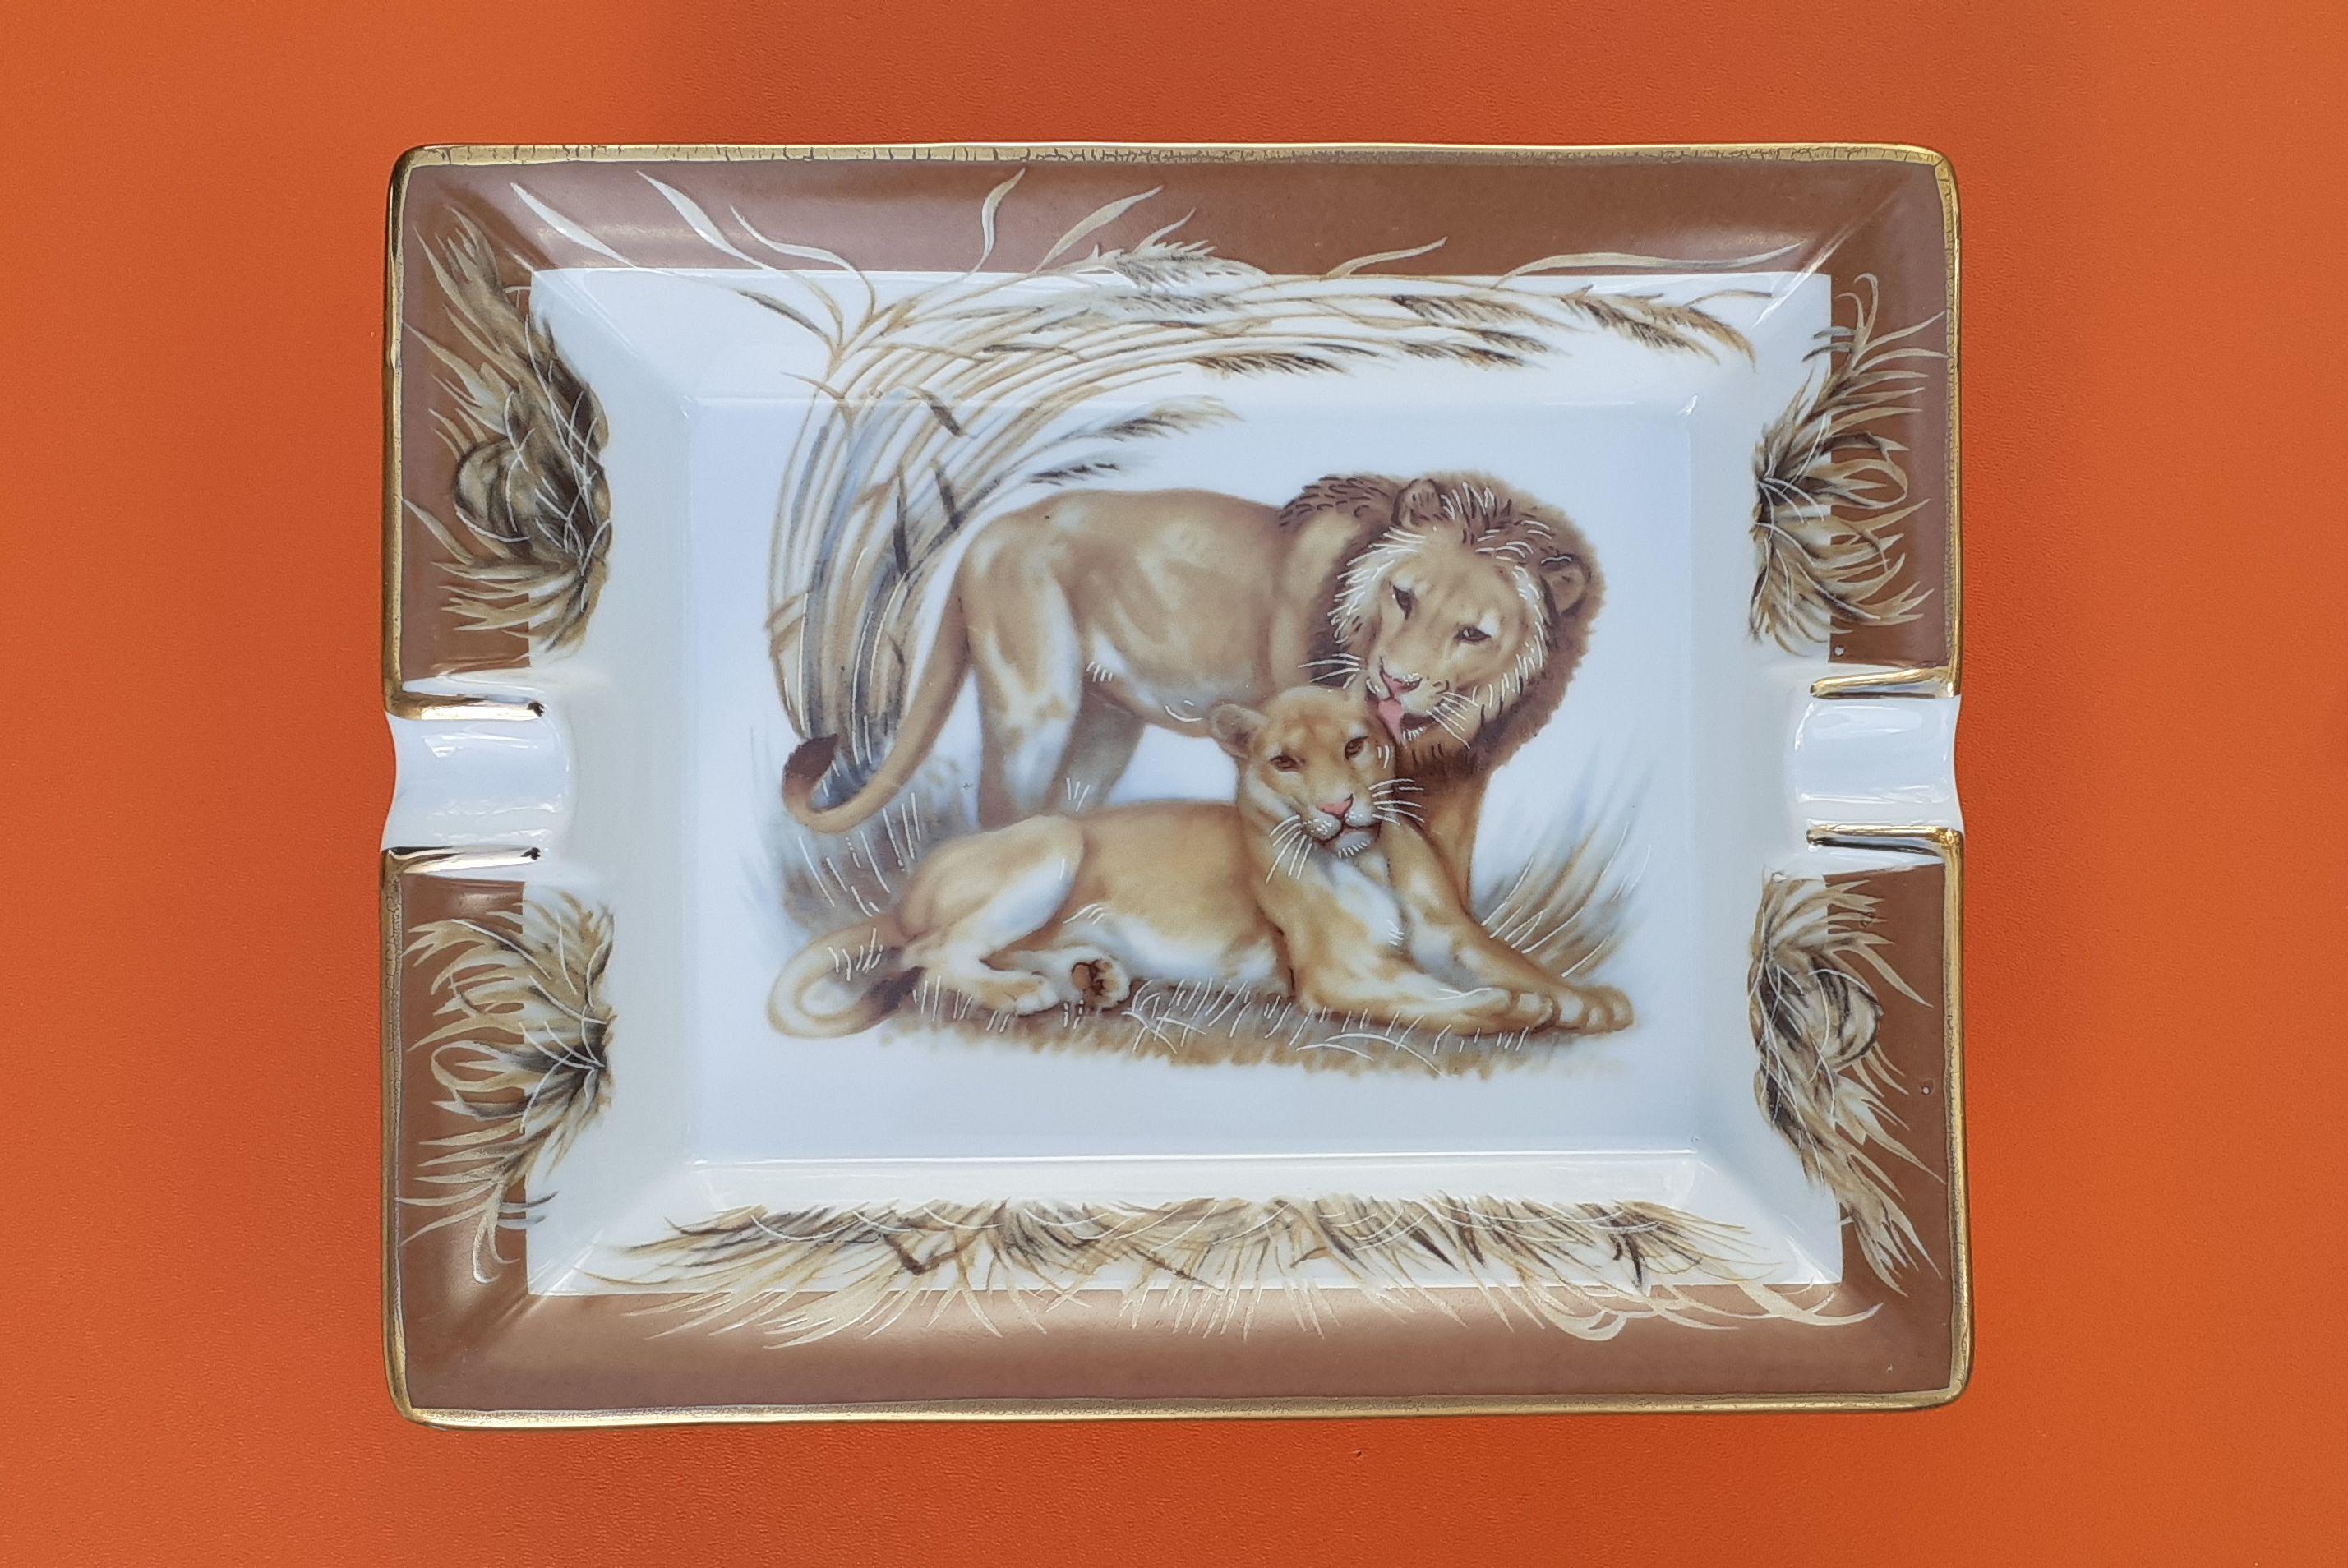 Beautiful Authentic Hermès Ashtray

Pattern: lion and lioness in a savannah setting

Made in France

Made of Porcelain with Golden Edges

Colorways: White, Beige, Brown

